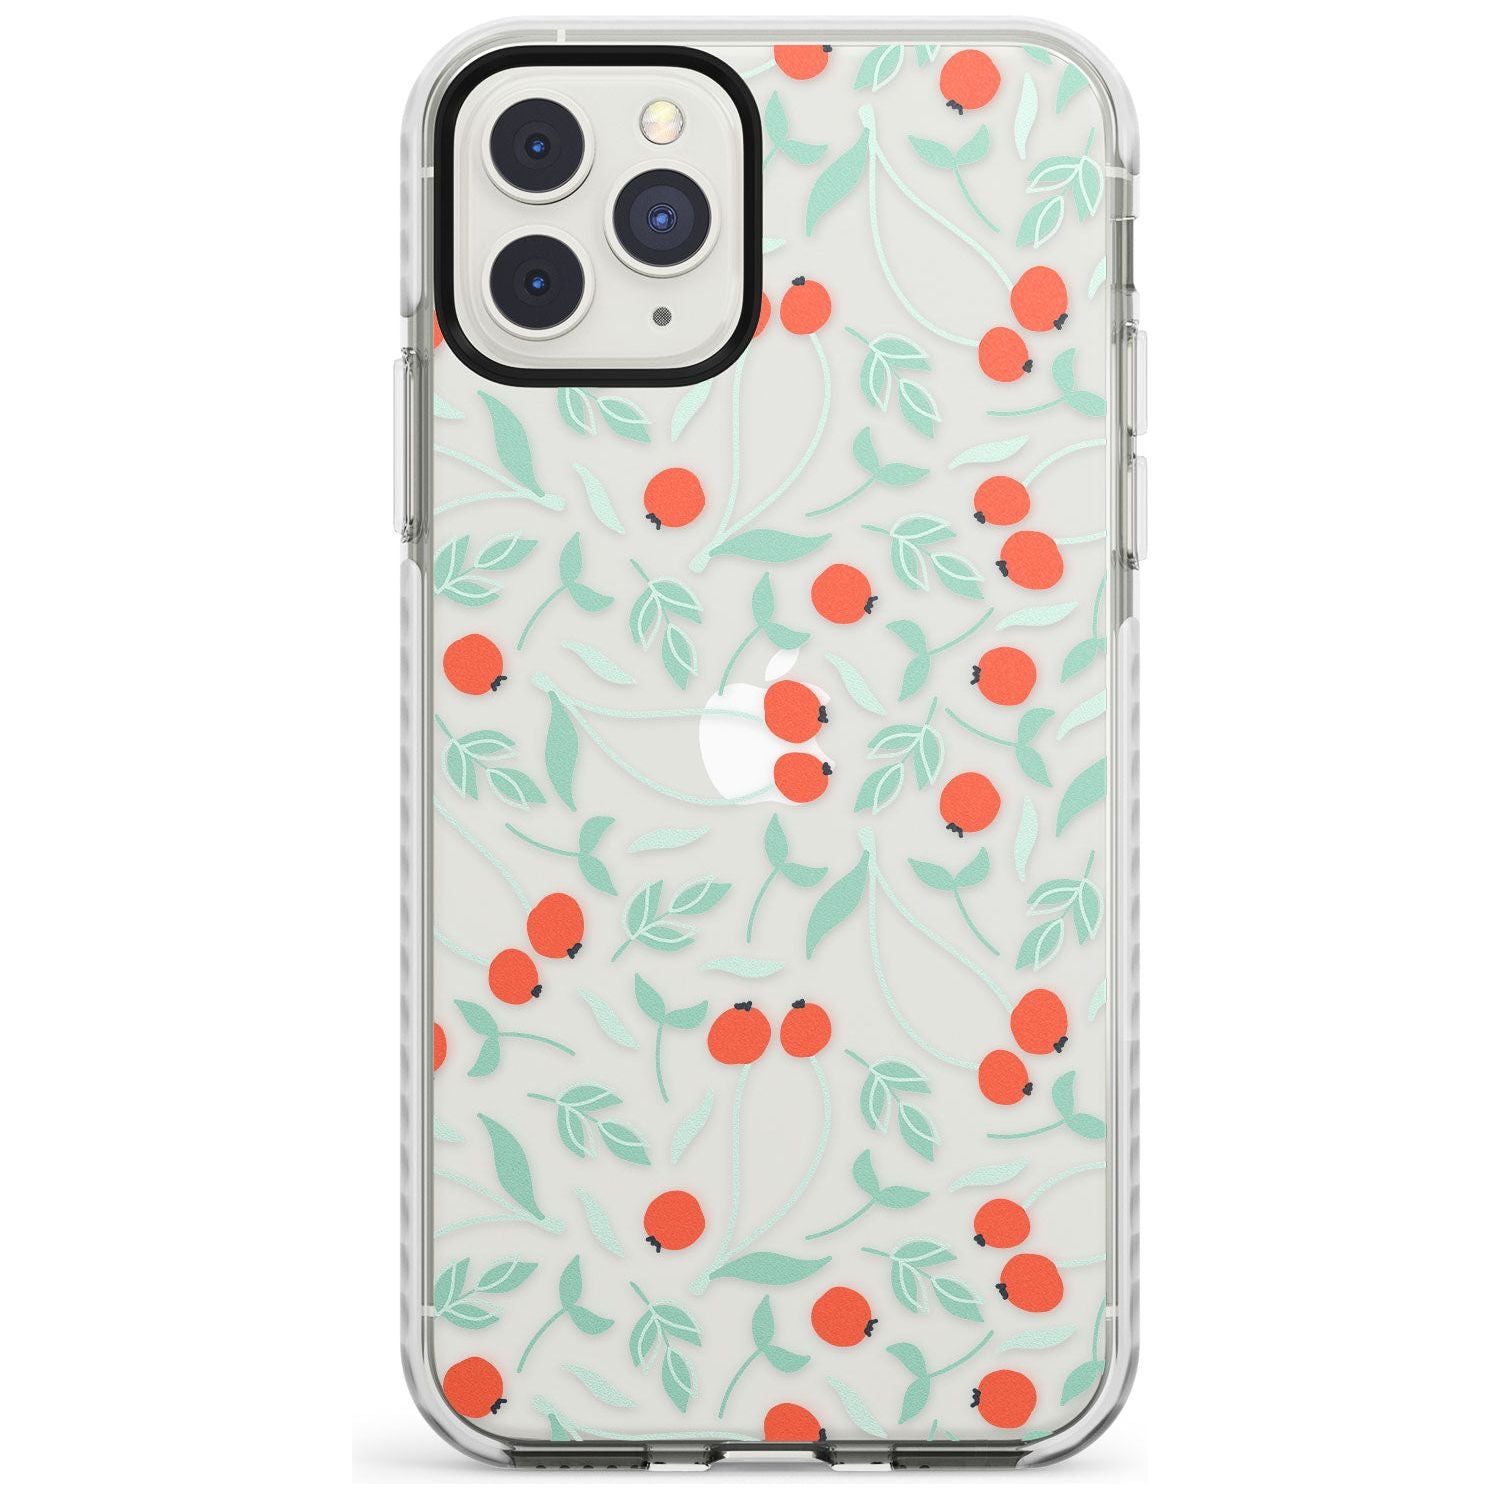 Red Berries Transparent Floral Impact Phone Case for iPhone 11 Pro Max